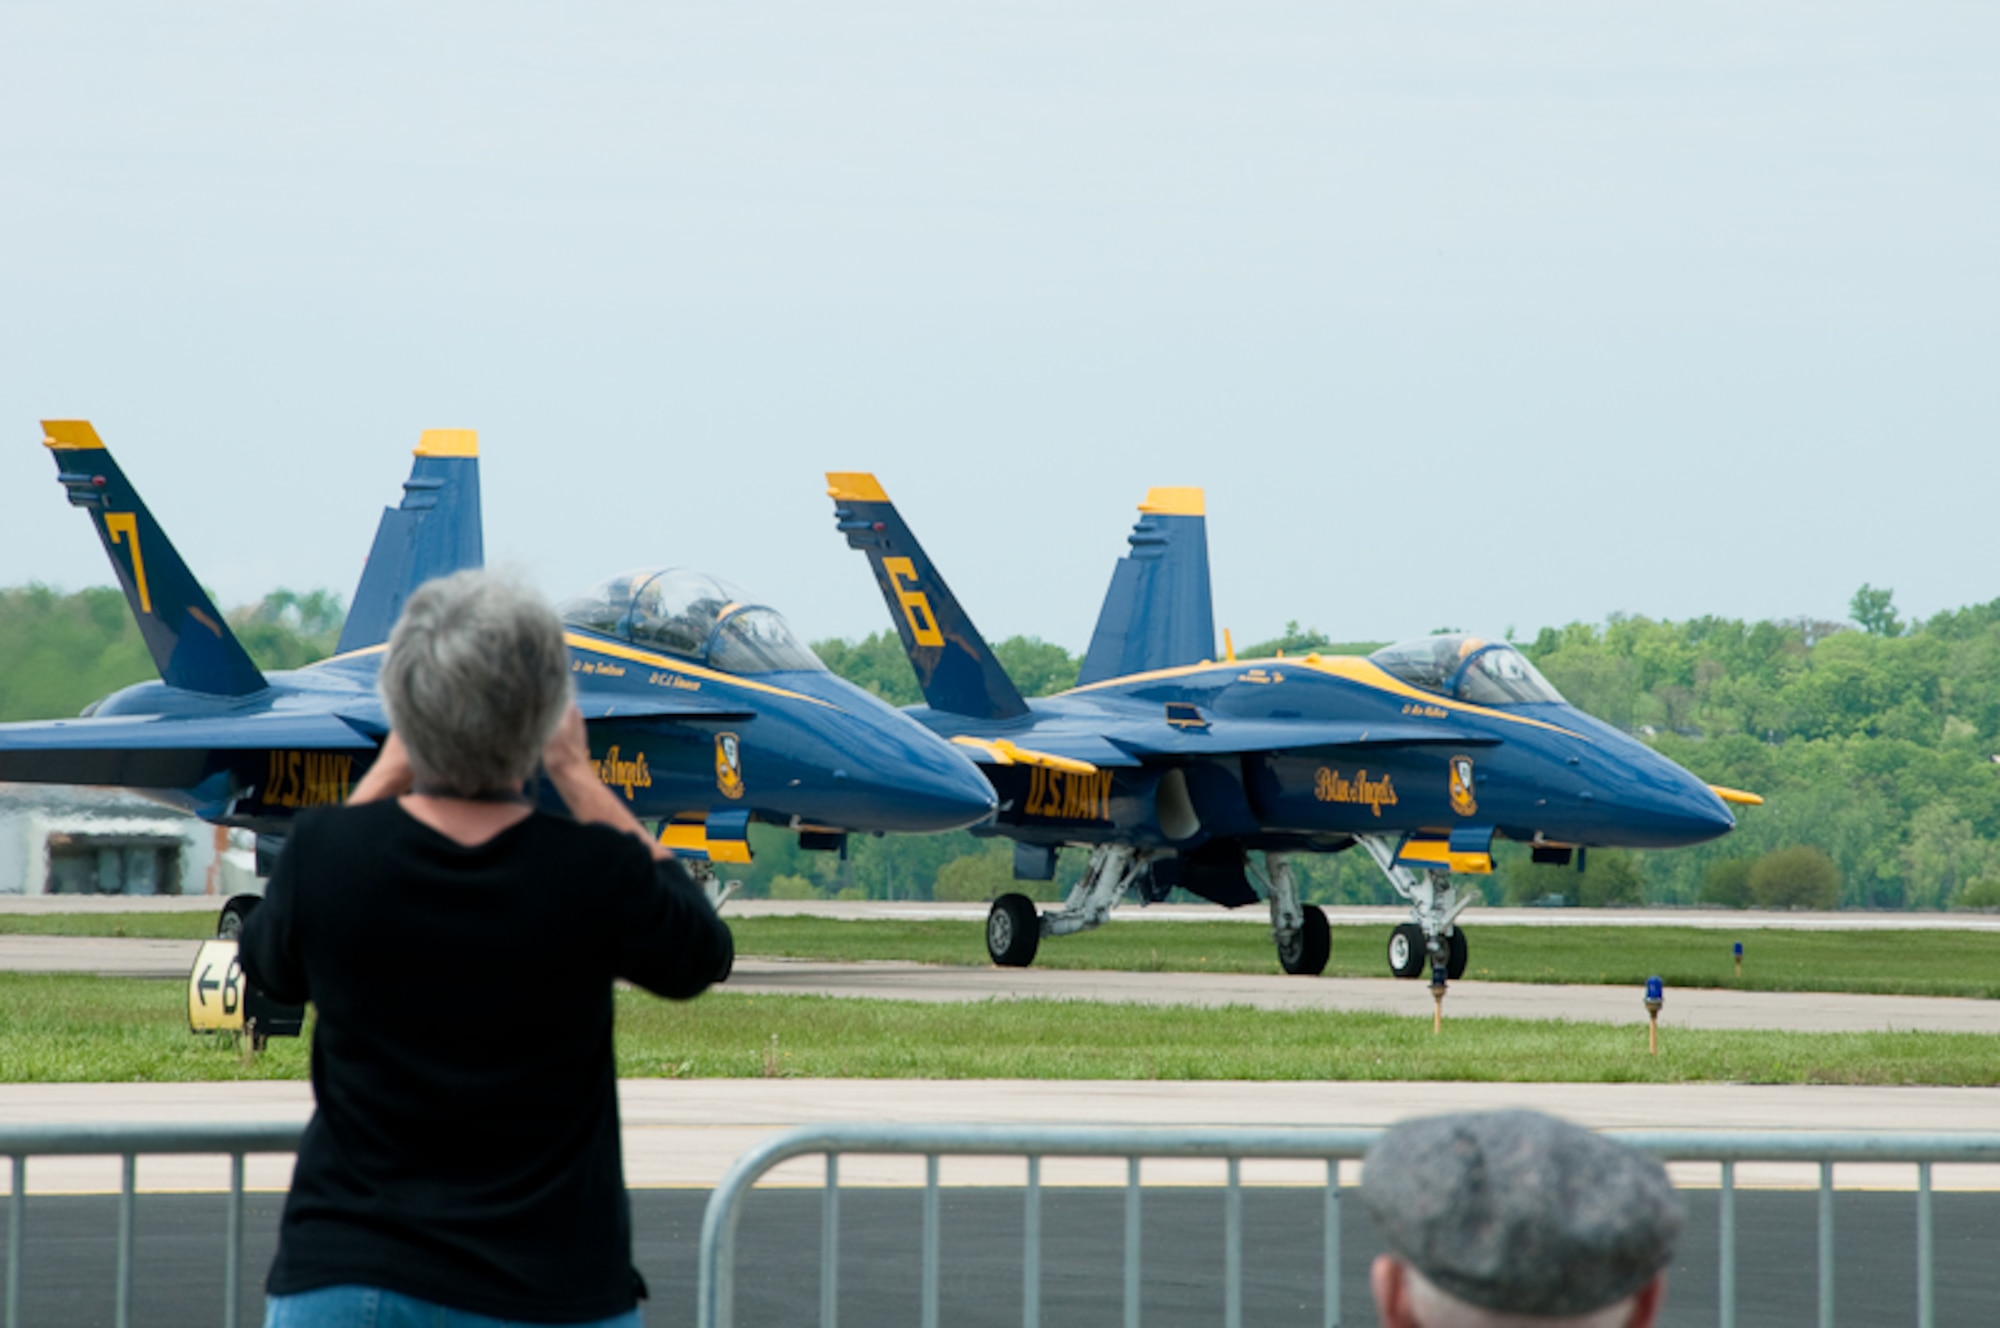 The 139th Airlift Wing hosts the Sound of Speed Air Show on the base in St. Joseph, Mo., Friday, April 30, 2010.  The star of the Air Show is the Navy's Blue Angels.  (Photo by Airman 1st Class Kelsey Stuart/Released)